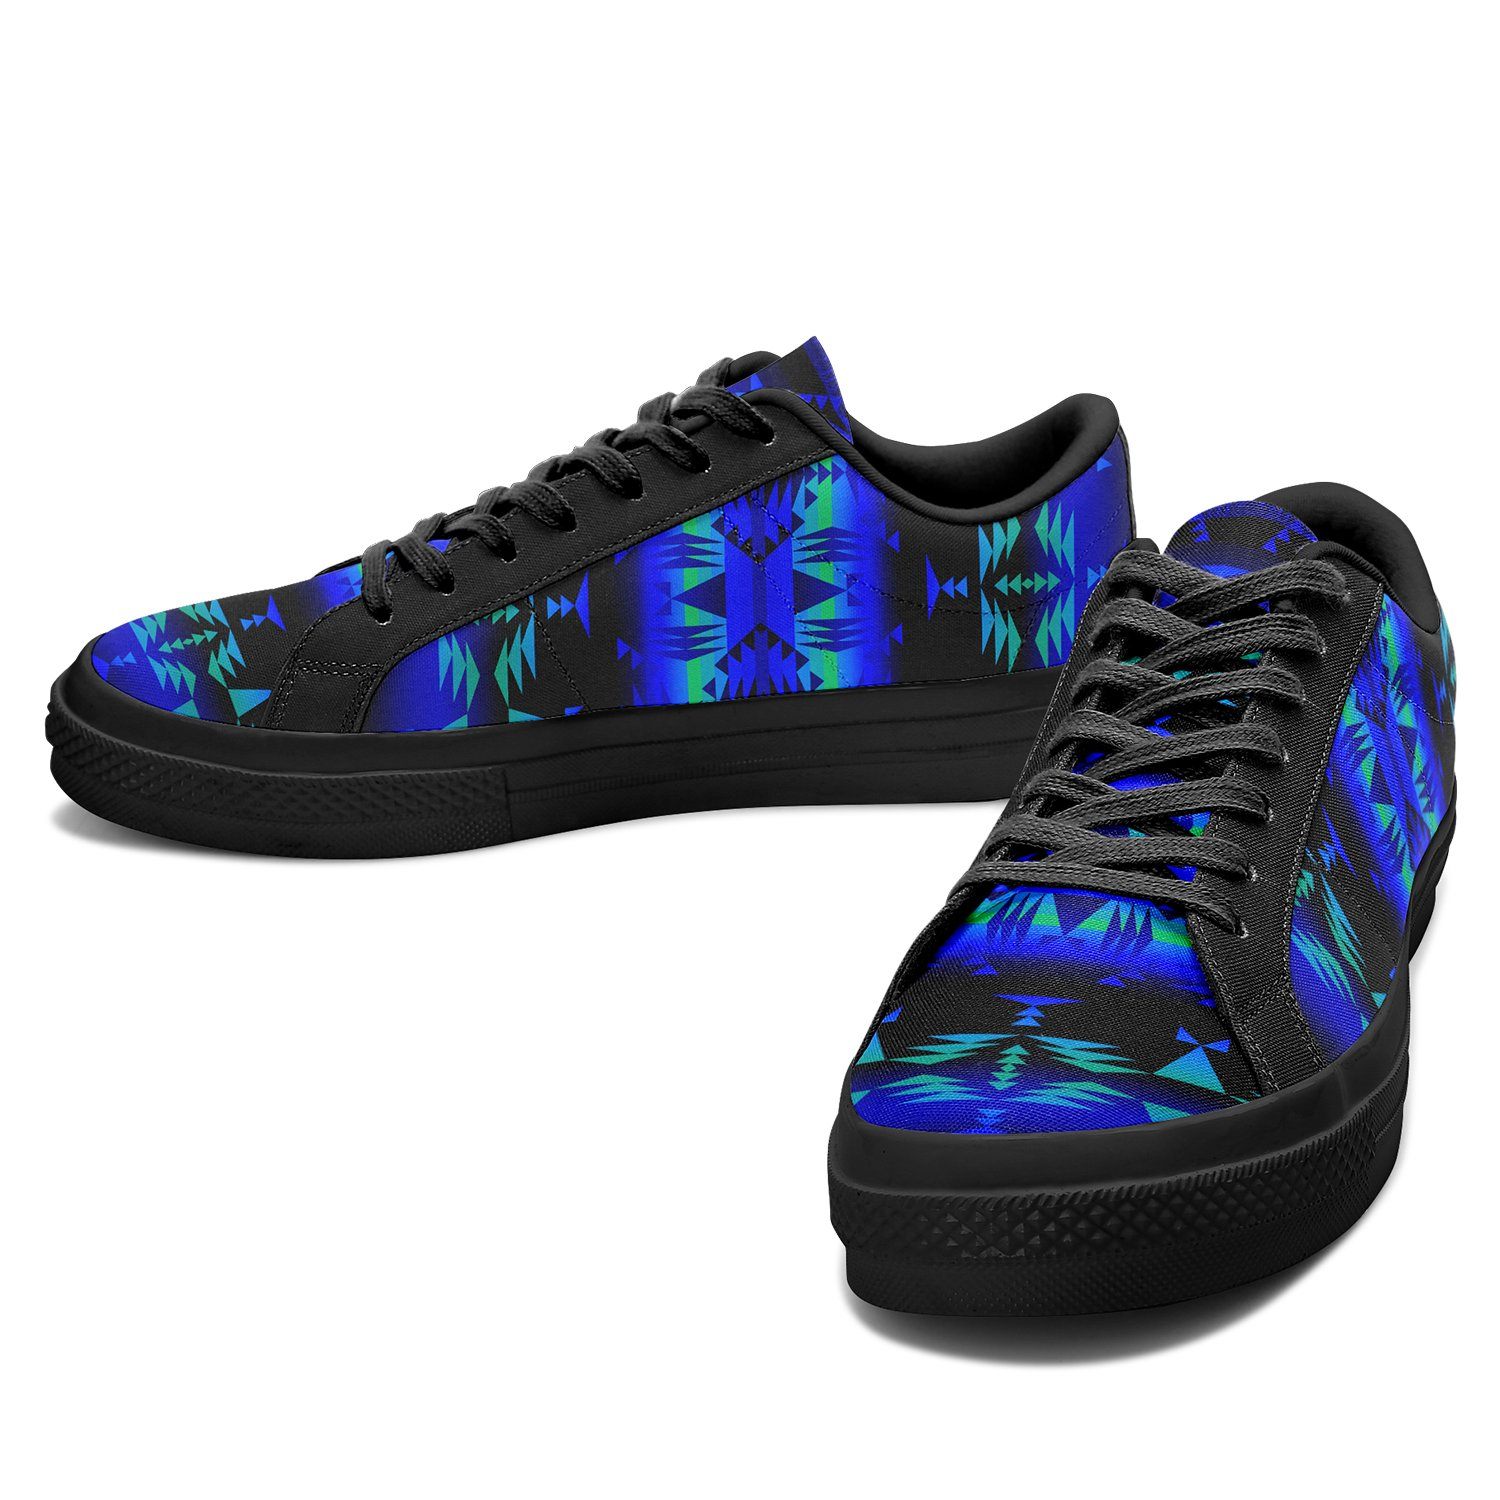 Between the Blue Ridge Mountains Aapisi Low Top Canvas Shoes Black Sole 49 Dzine 